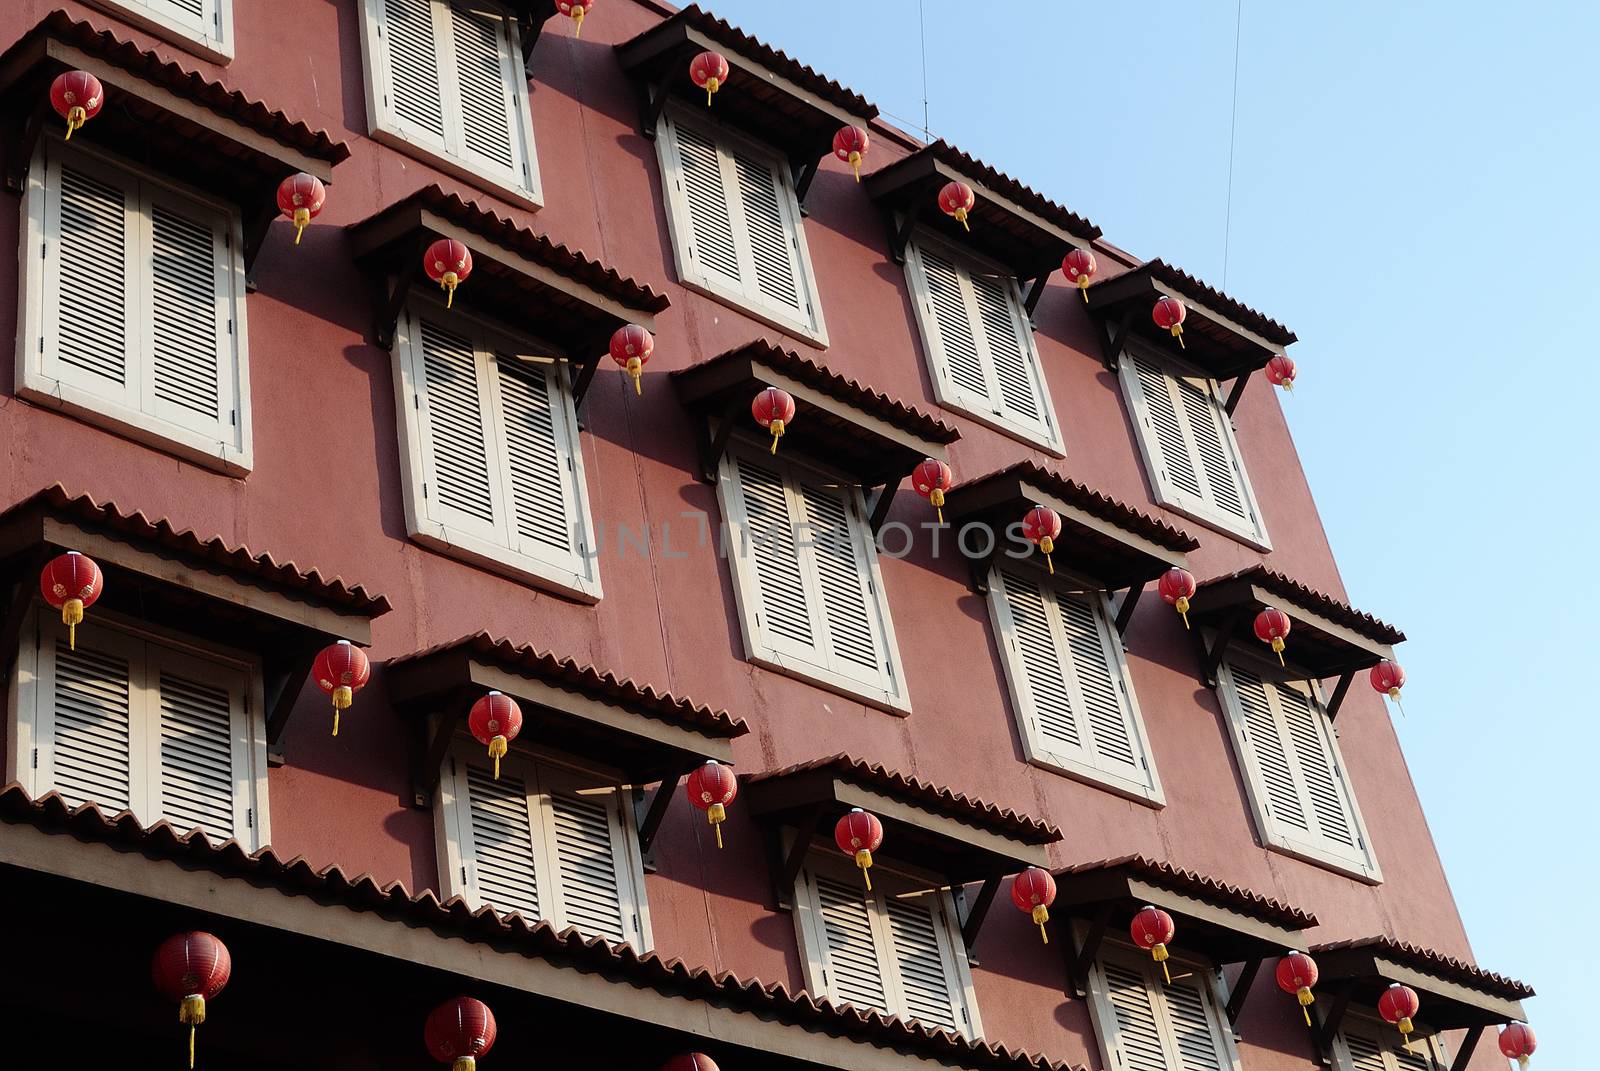 highly decorated shophouse fronts, Malacca, Malaysia by think4photop